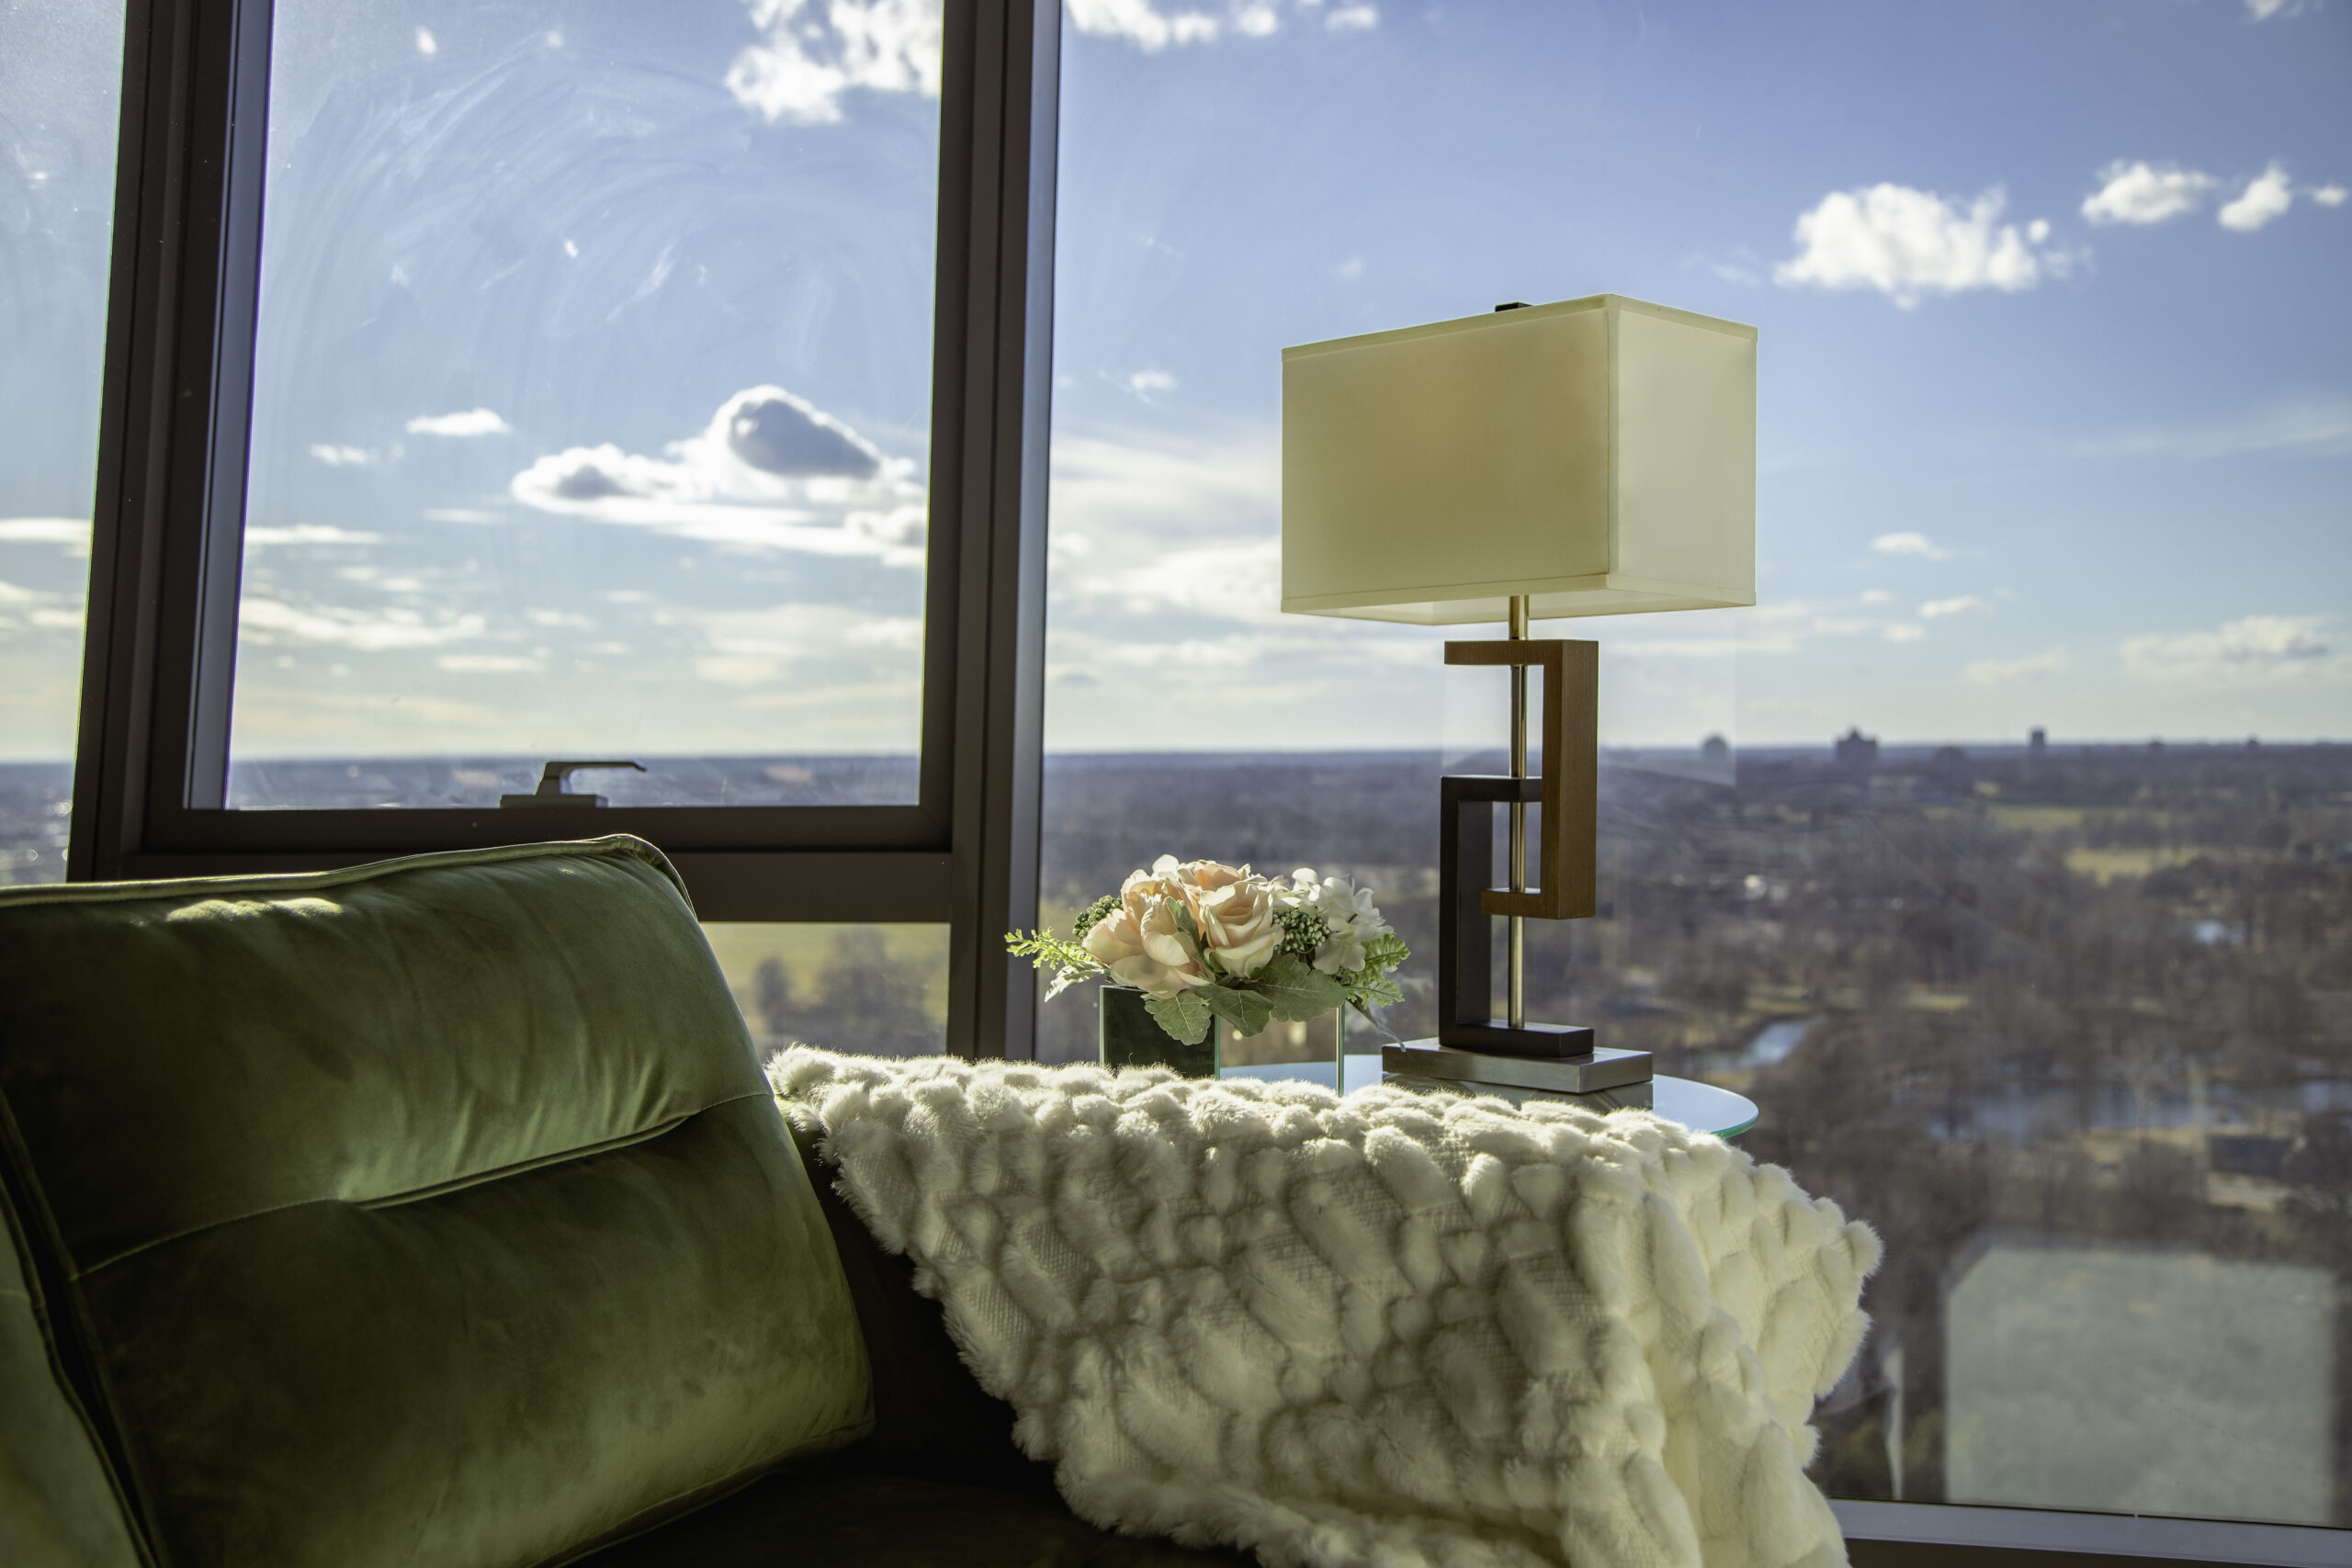 a corner of a green velvet couch has a fluffy white blanket thrown over the arm of the couch. floor to ceiling windows are visible in the background, showing a view of a city scape with a bright blue sky.